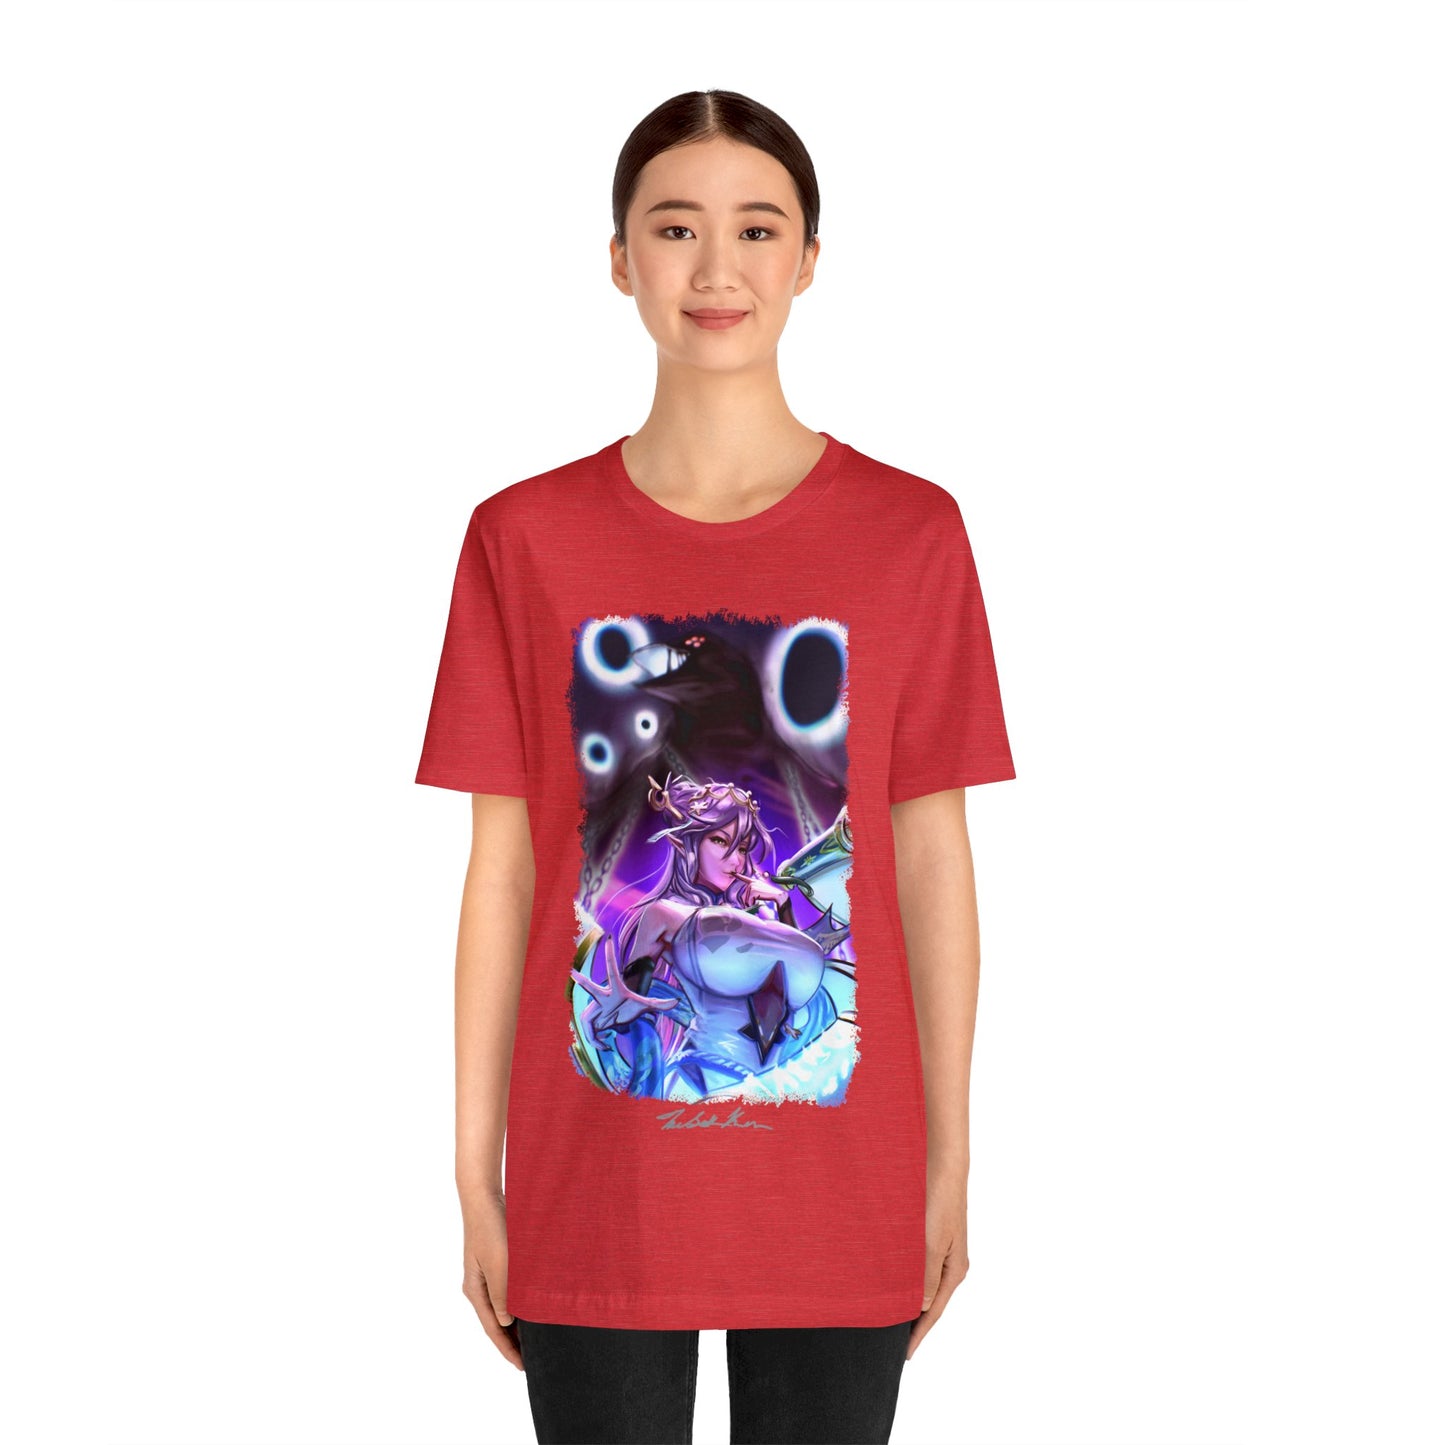 Aria by Terry Kwon - Epic Seven T-shirt (Unisex)